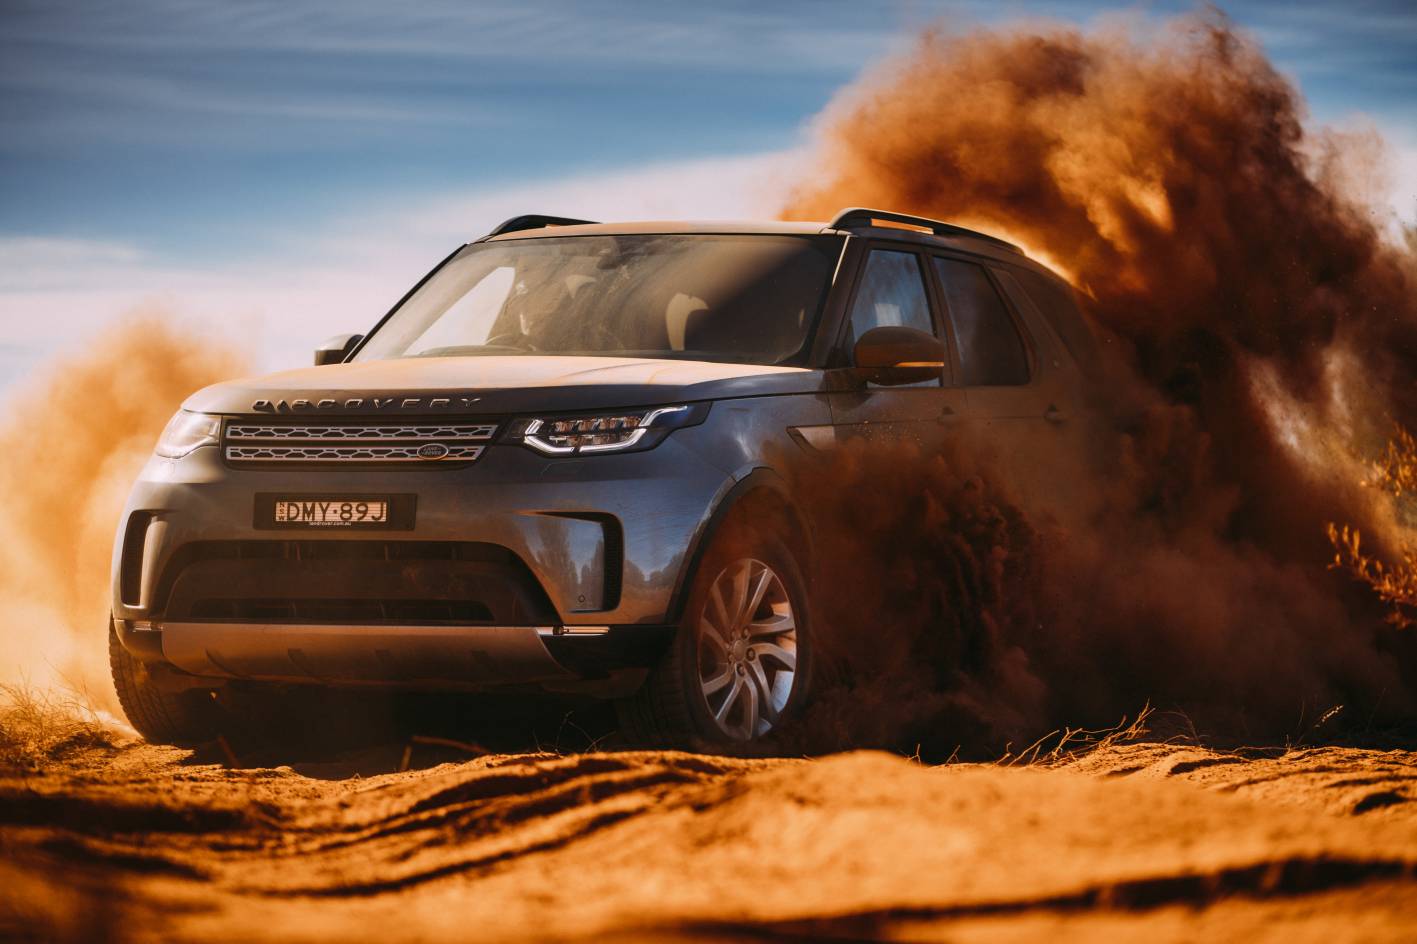 2017 Land Rover Discovery on sale in Australia from $65,960